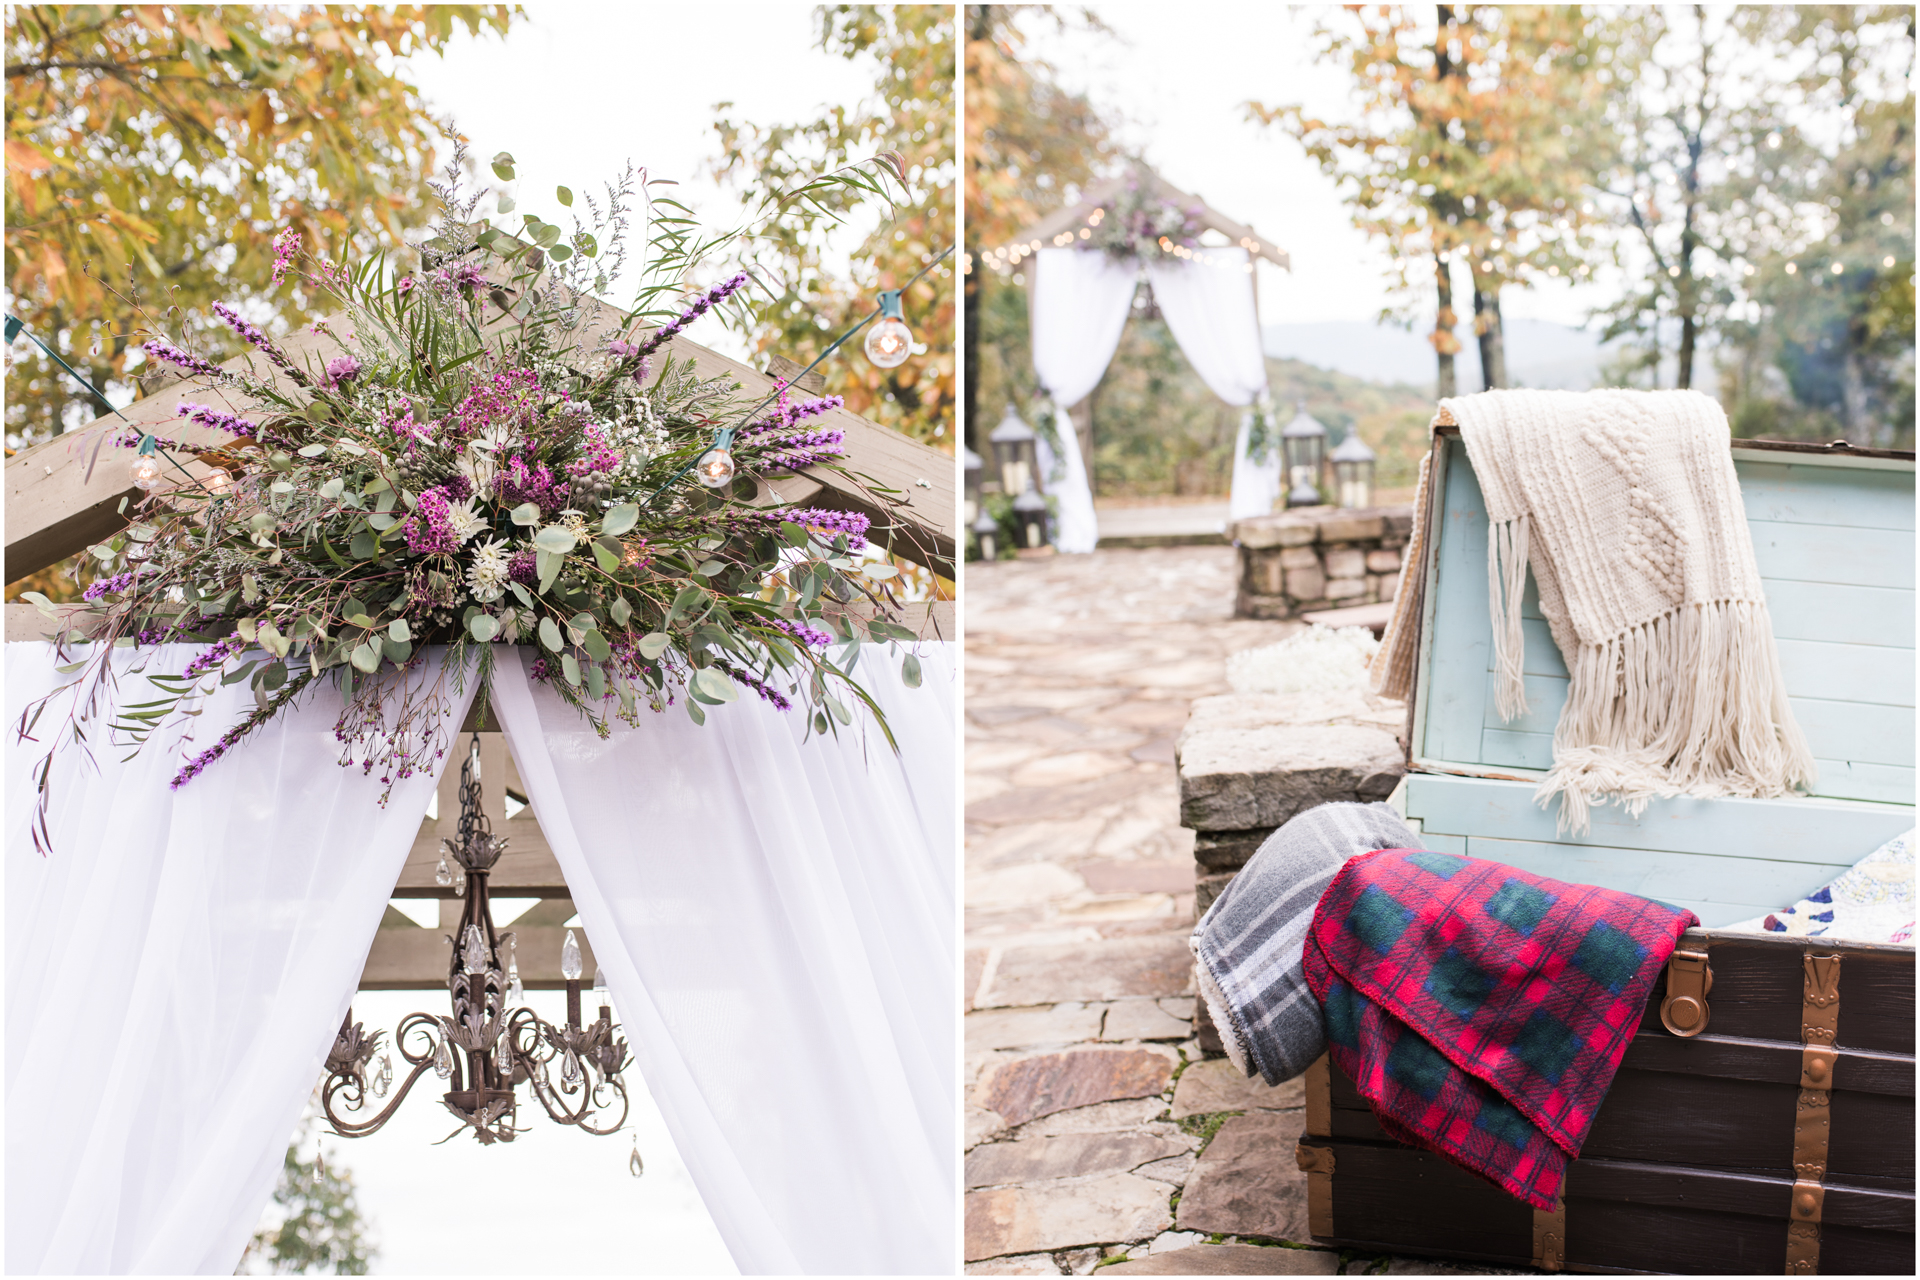 Backyard Ceremony with a Trunk of Quilts for Guests